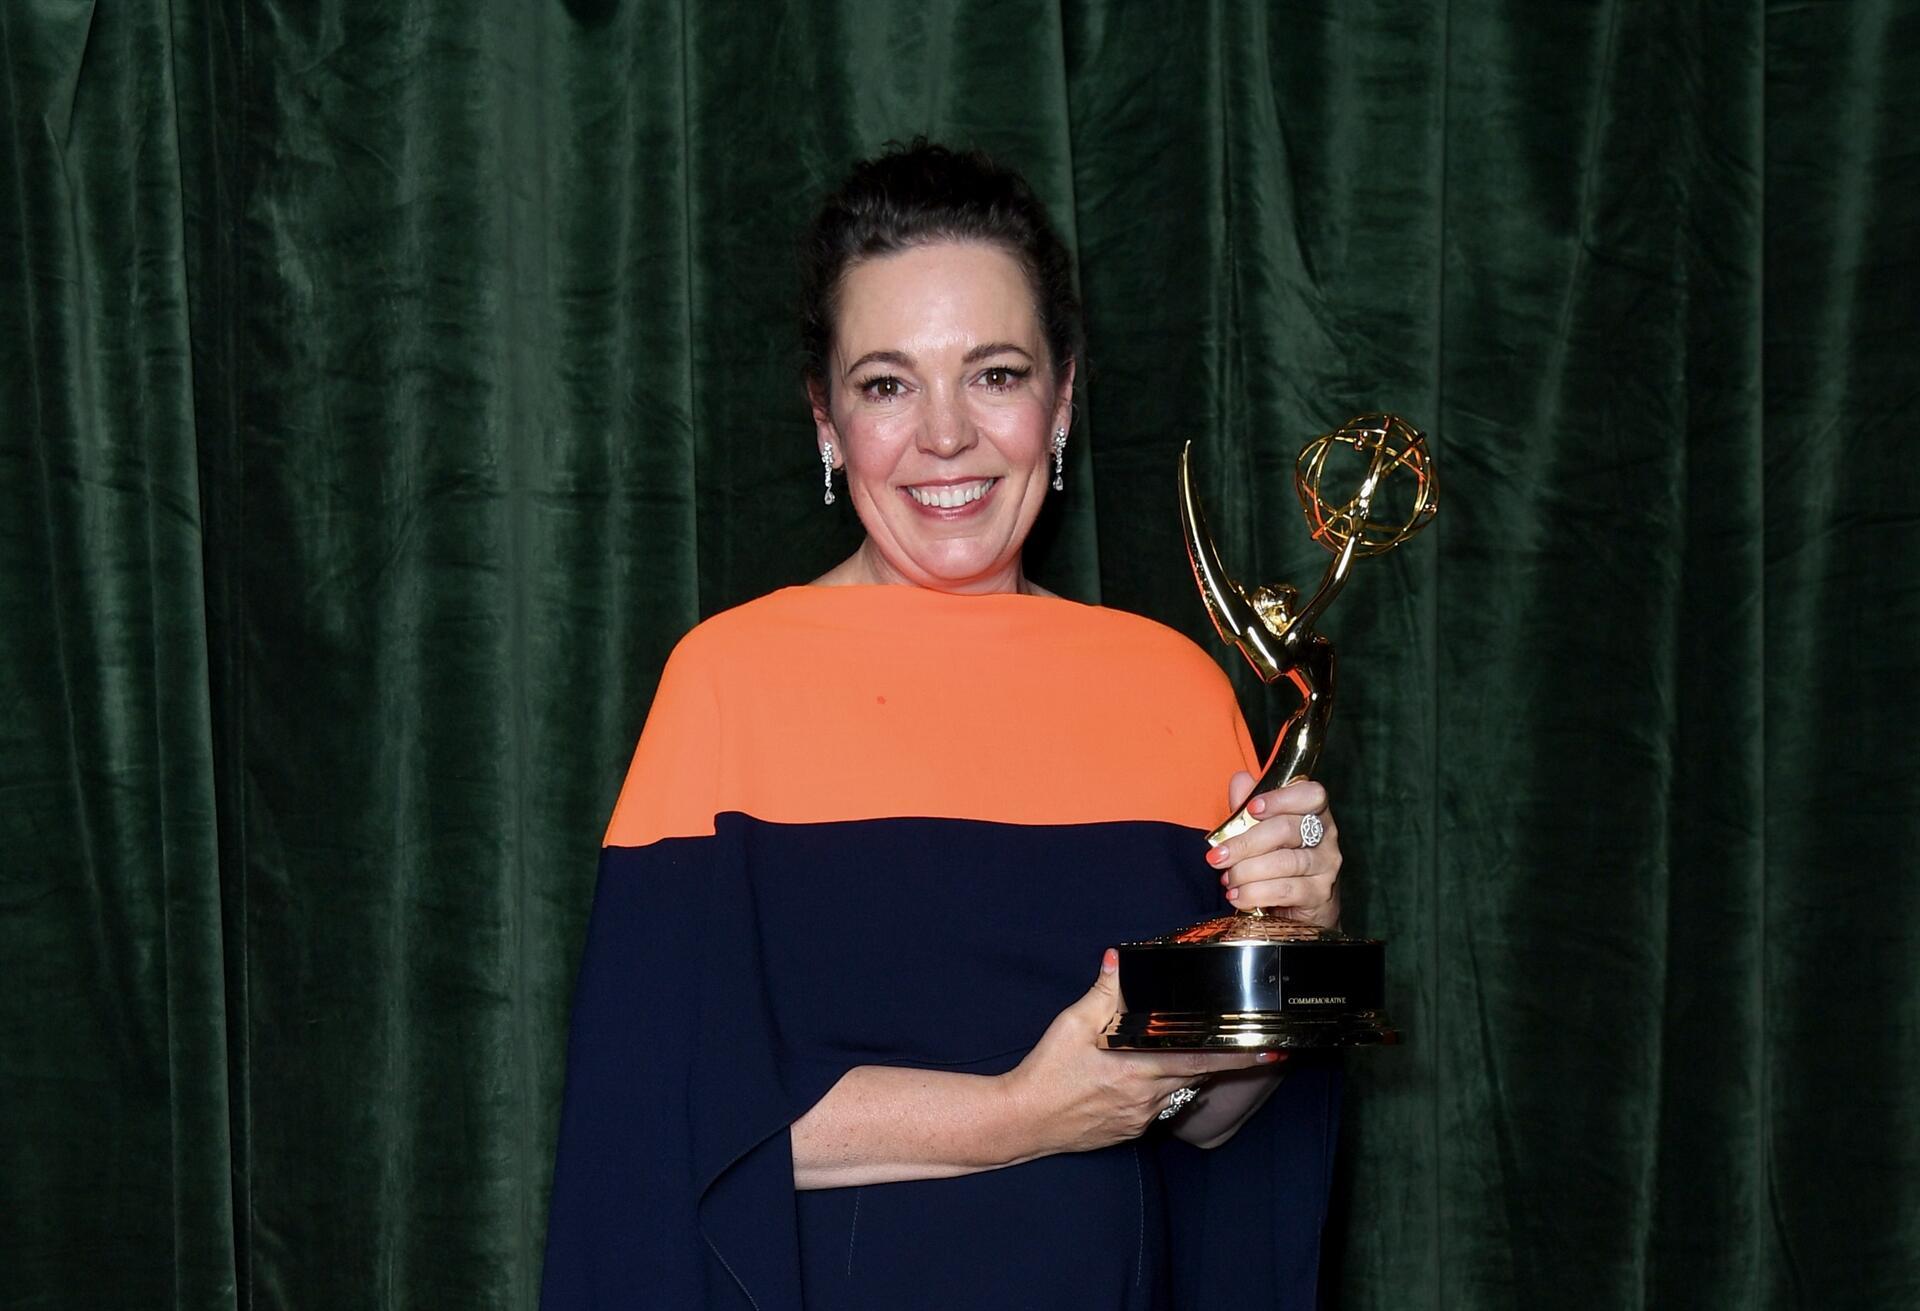 Ted Lasso The Crown Win Top Emmy Awards On Streaming Heavy Night 4933